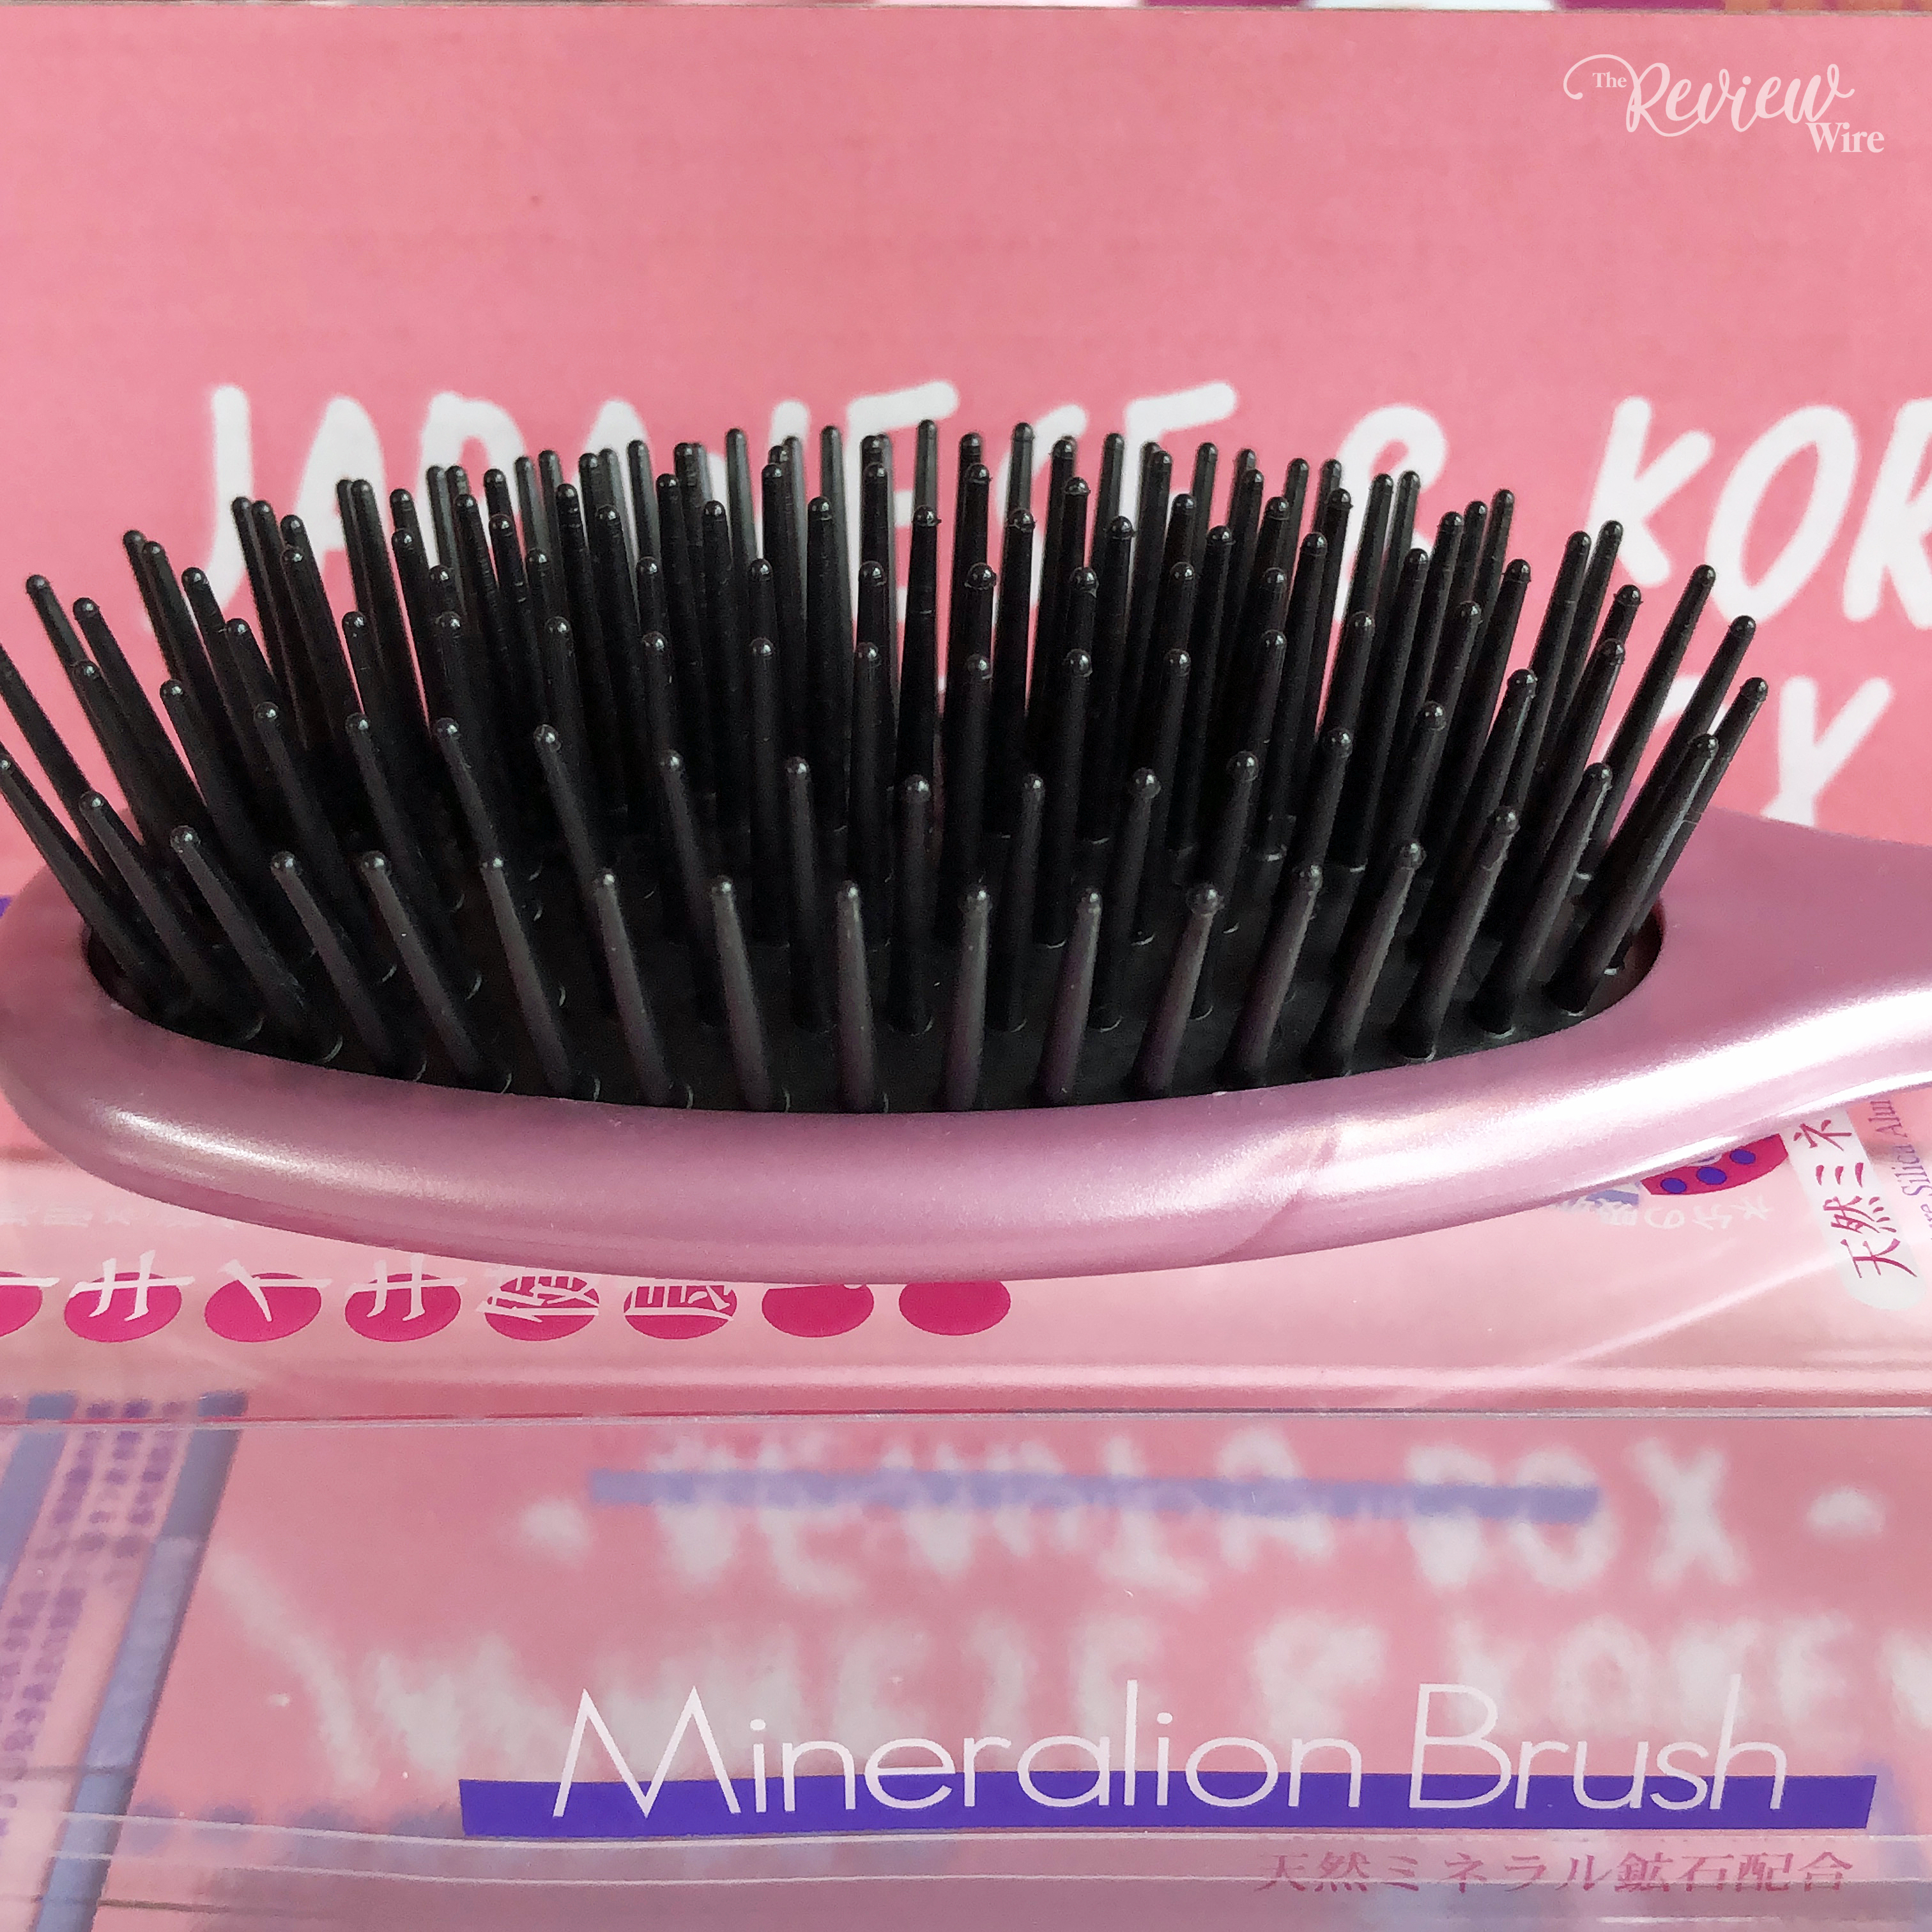 The Review Wire: nomakenolife Korean and Japanese Beauty Box: March 2019 Vibrant Vibes: Mineral Ion Hairbrush